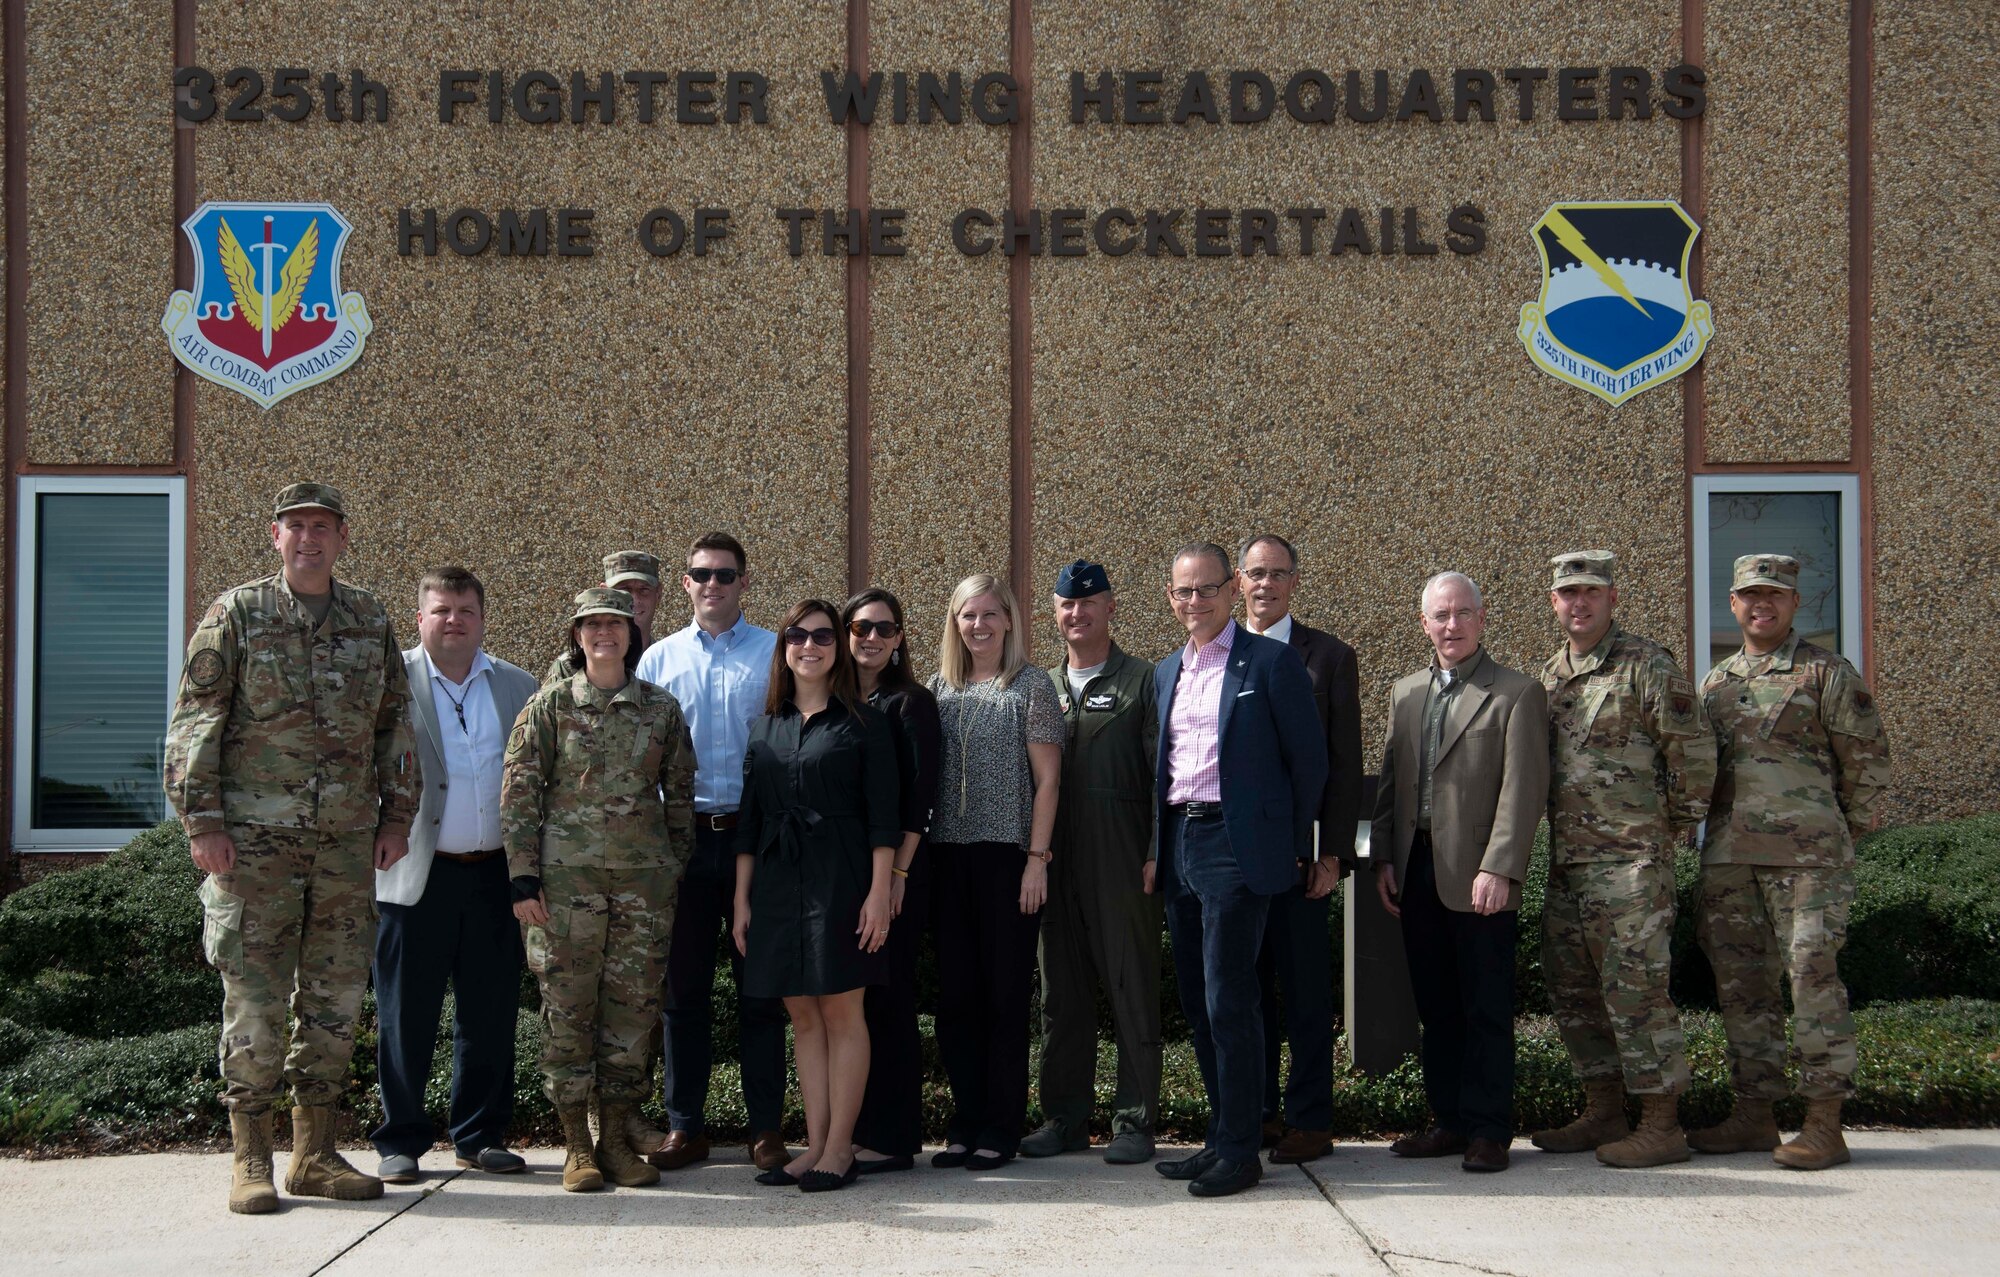 Members of the Senate Appropriations Committee, military members, and civilian partners, pose for a photo on Oct. 28, 2019, at Tyndall Air Force Base, Florida. The professional staff members toured the base with Col. Brian Laidlaw, 325th Fighter Wing commander and his leadership team, to see the progress Tyndall had made since the devastation caused from Hurricane Michael in 2018. Laidlaw said the base is back to having 90 percent of the missions, conducted by 80 percent of the personnel, utilizing 50 percent of the facilities. (U.S. Air Force photo by Staff Sgt. Magen M. Reeves)